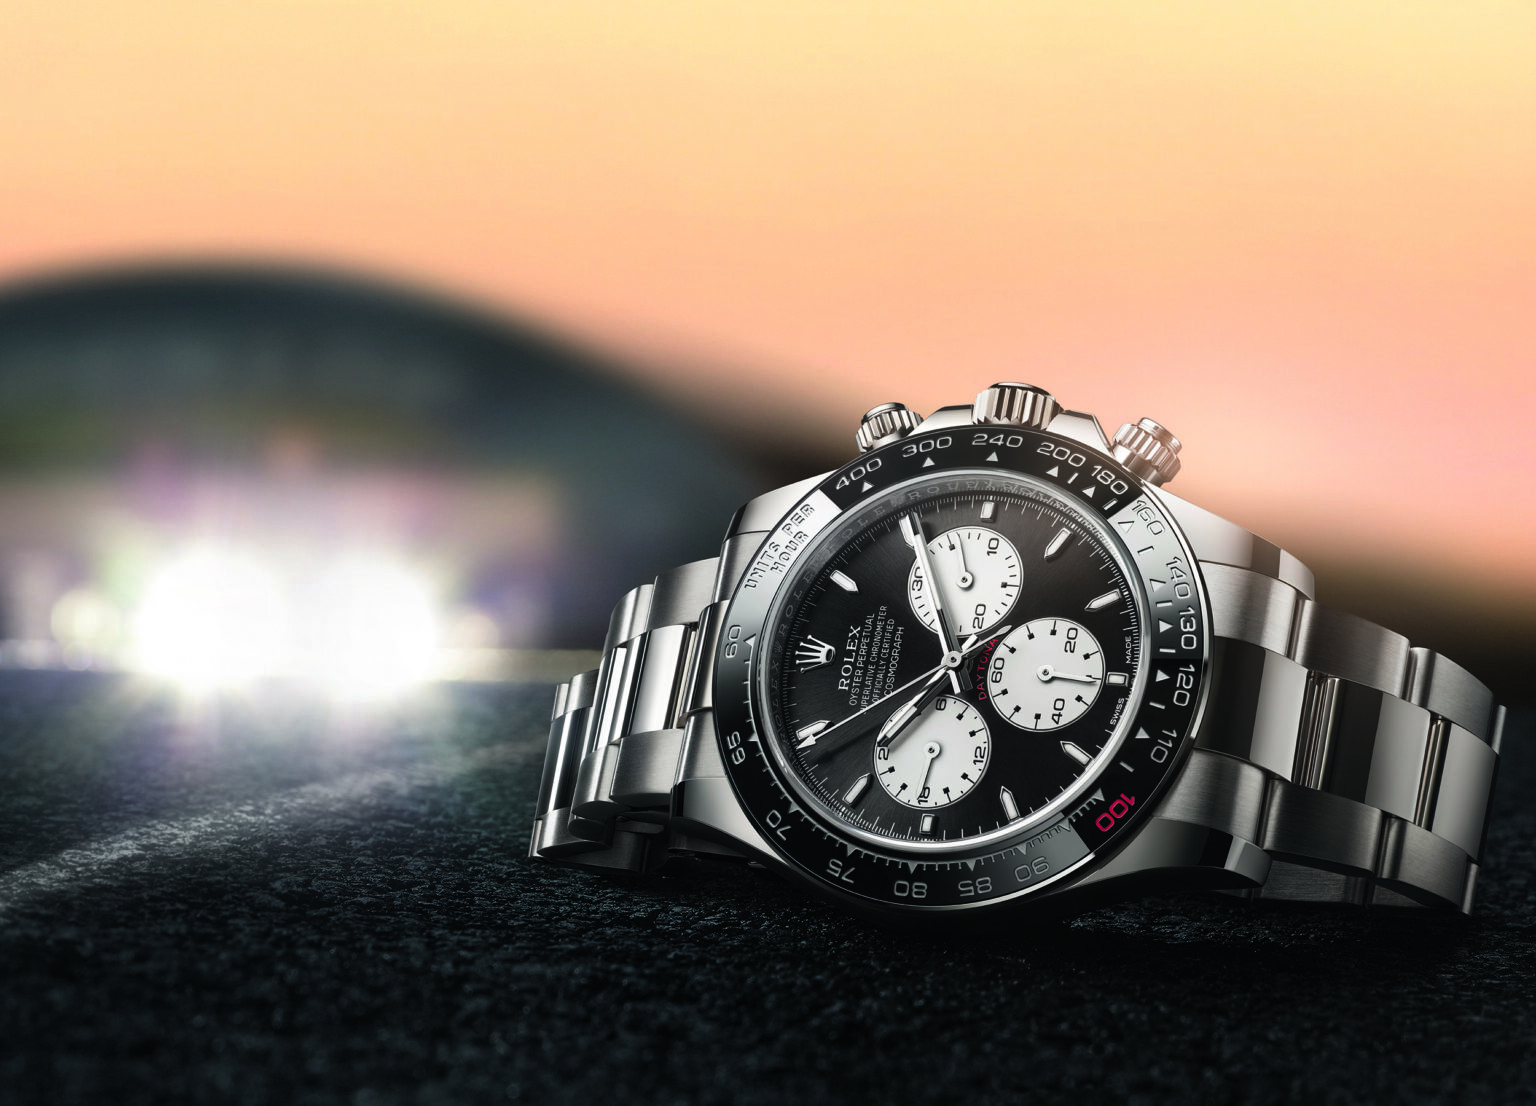 Rolex Le Mans Anniversary Daytona Rockets In Price To Over $320,000